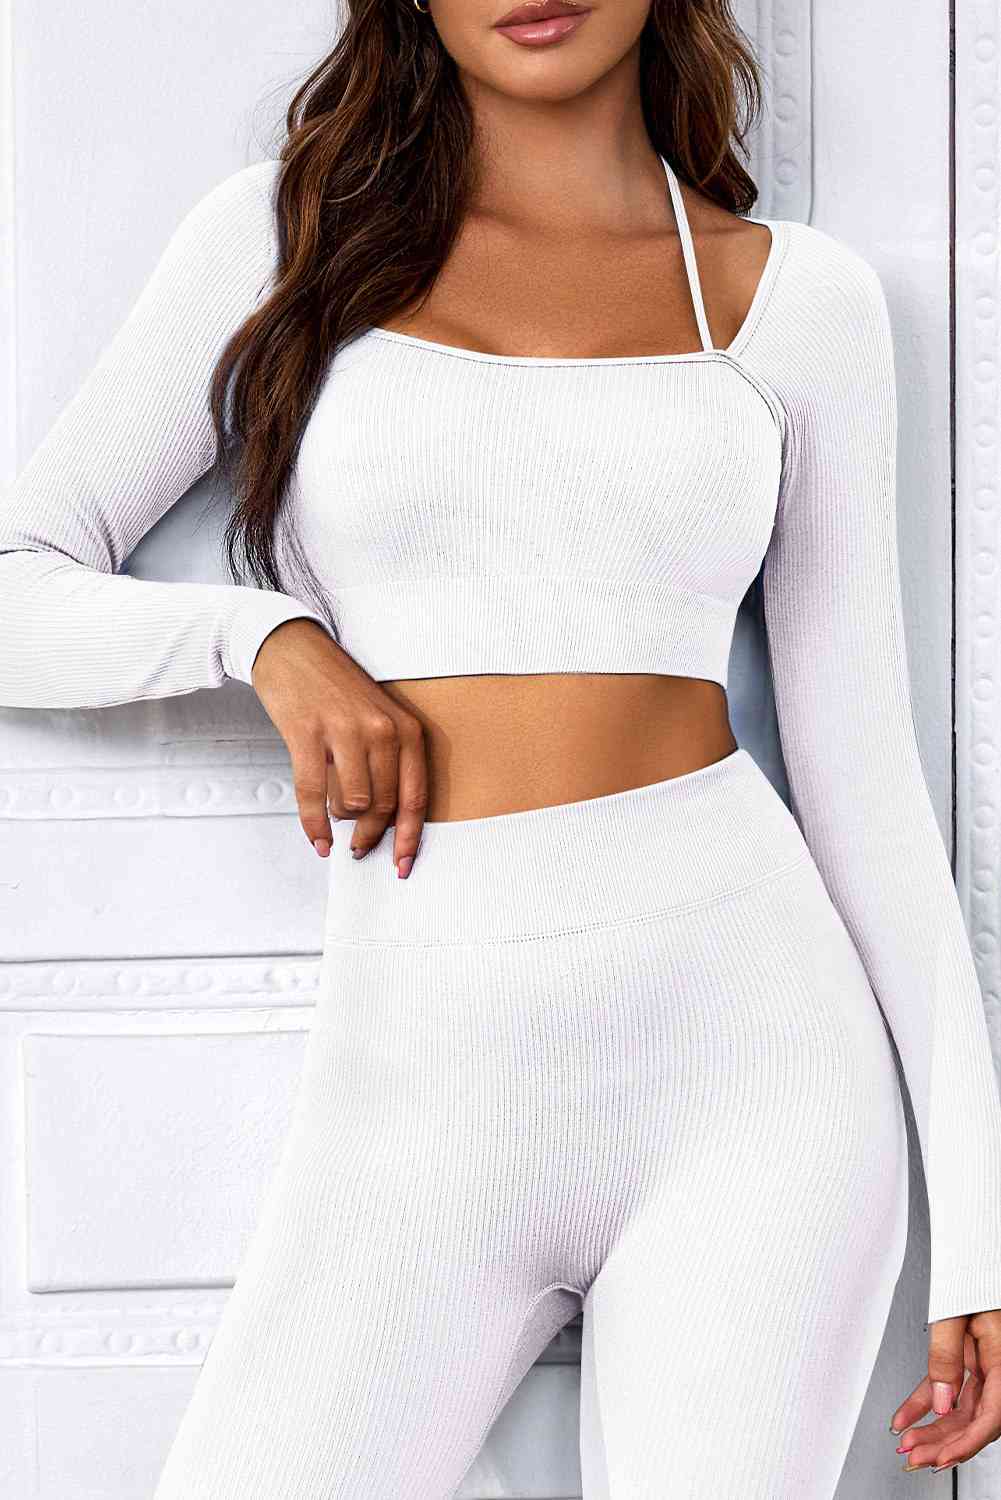 Trendsi cropped top White / S Long Sleeve Cropped Sports Top